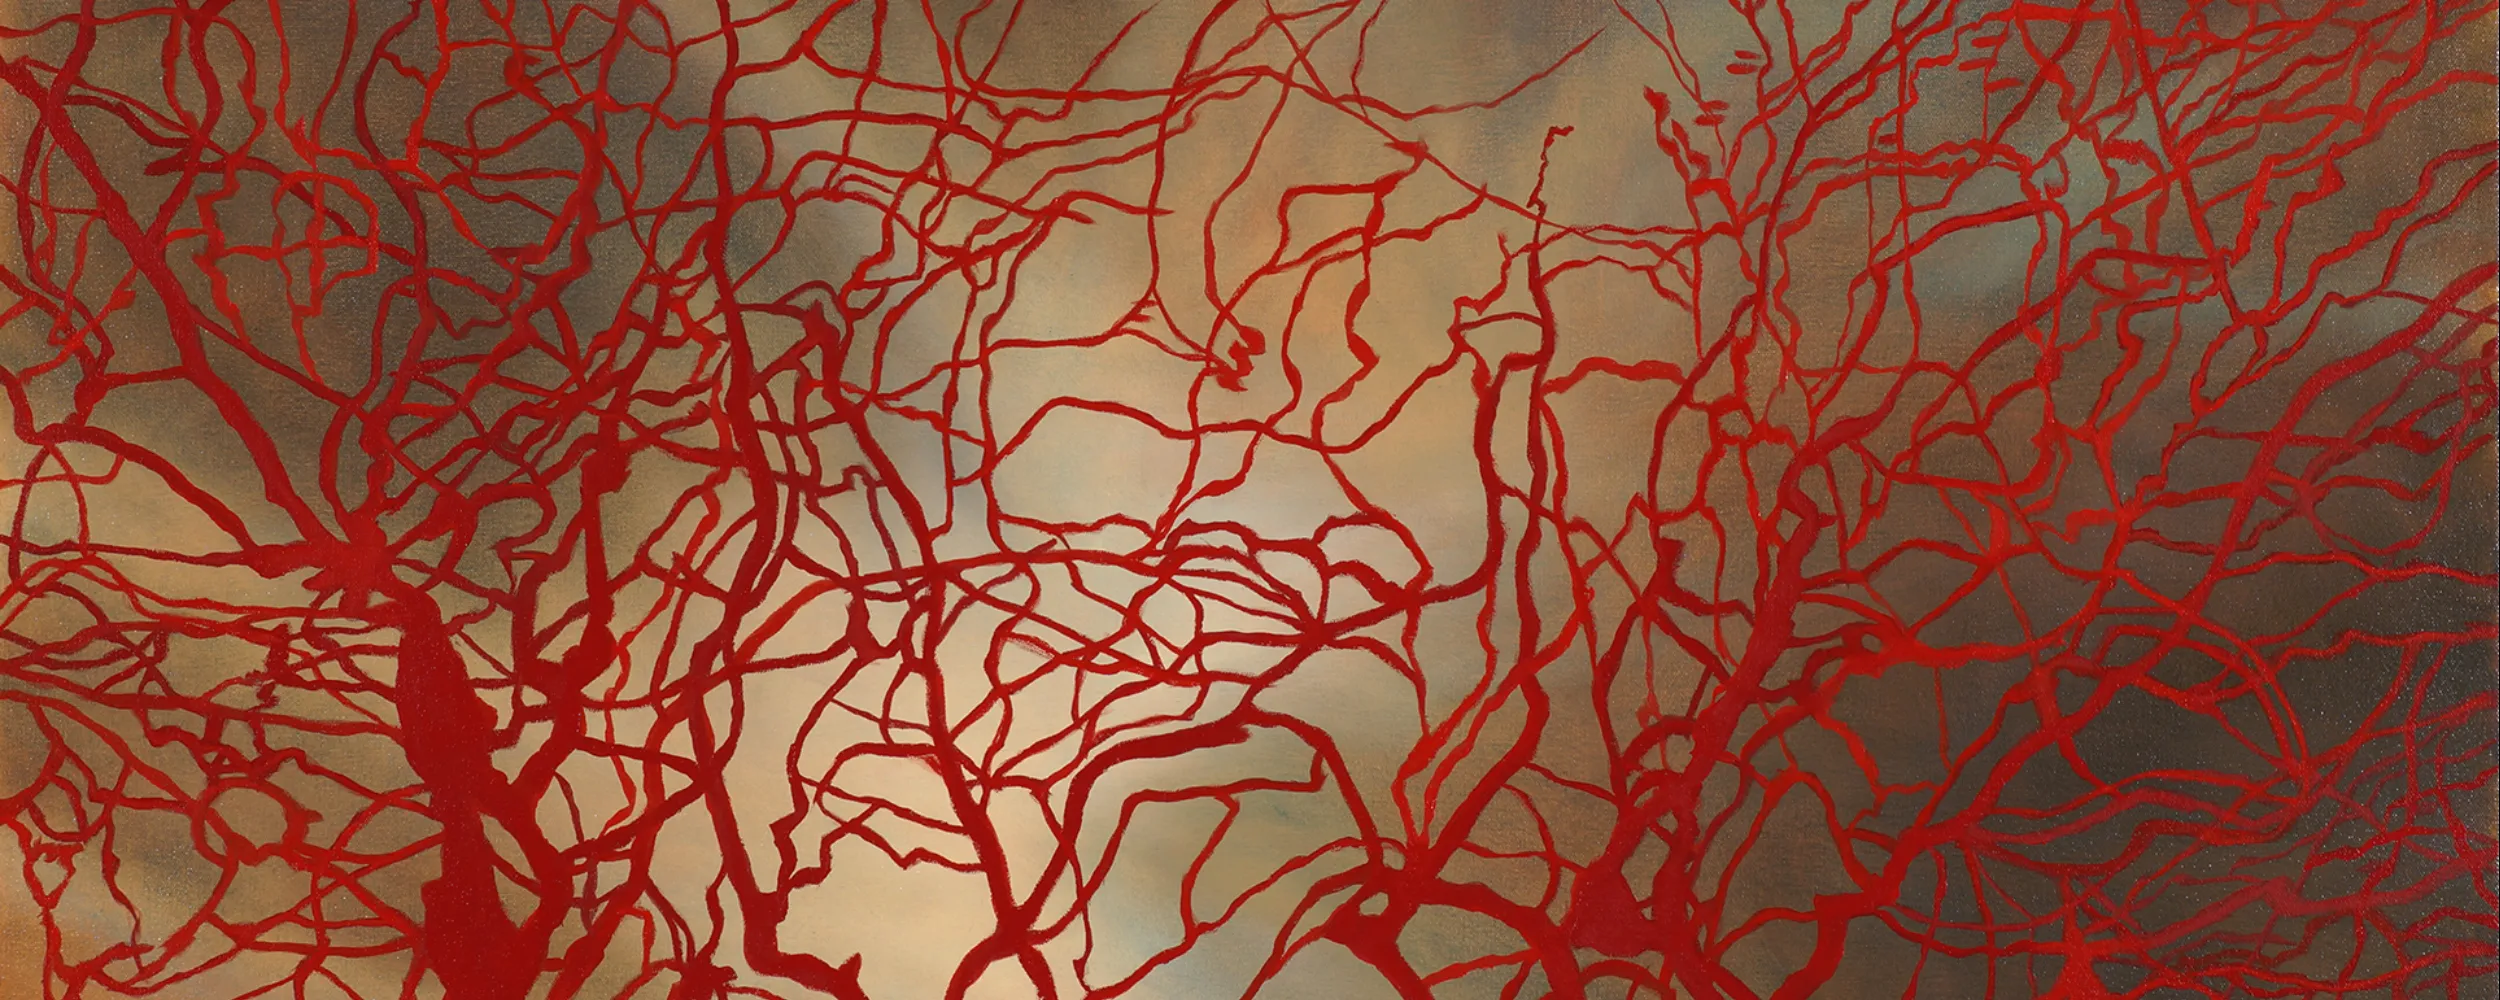 Oil painting of red vein-like branches spreading out over a dark background